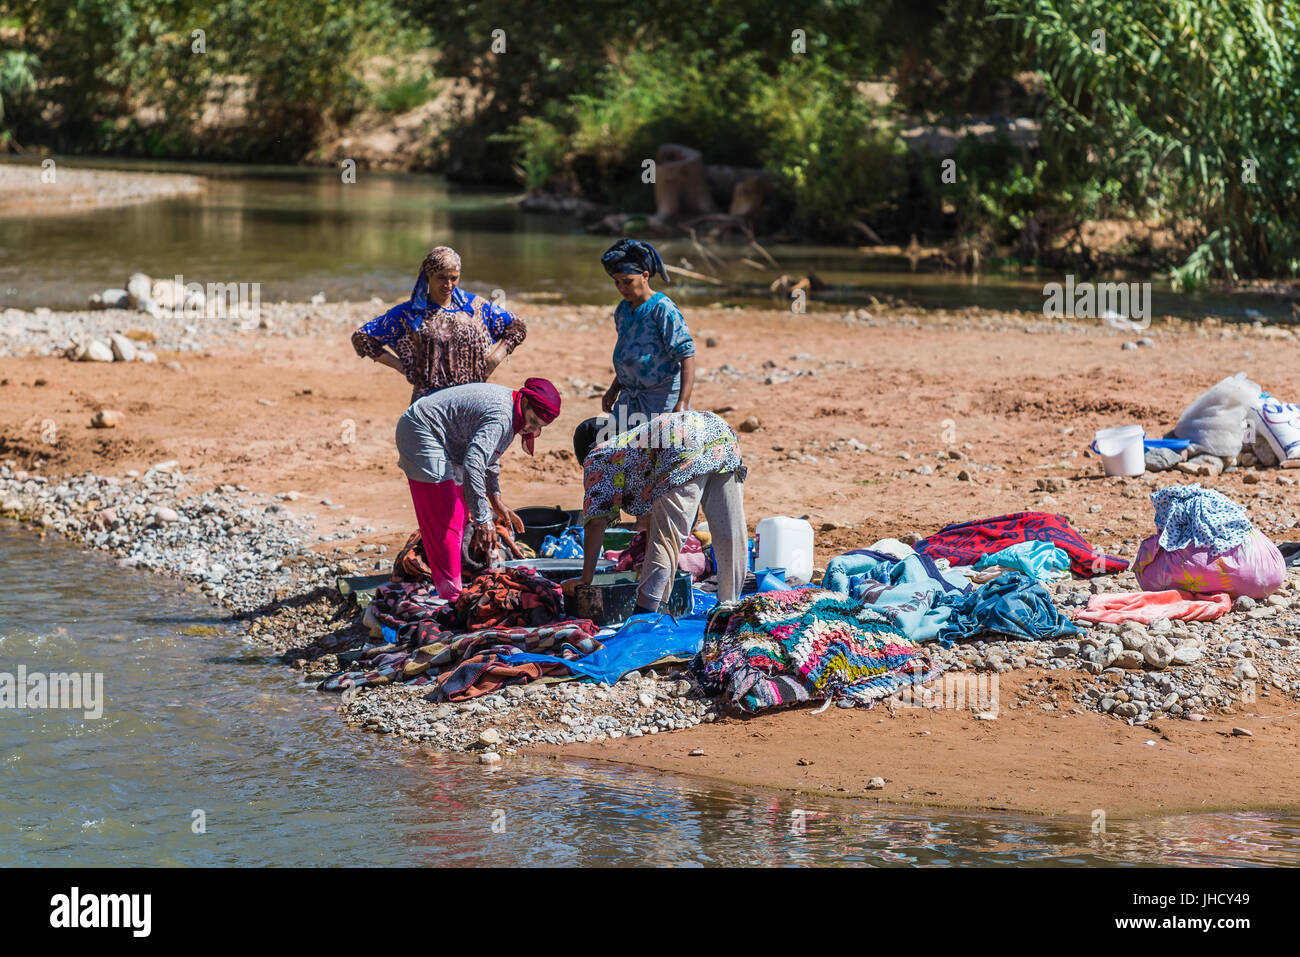 High Atlas, Morocco - September 19, 2015 - women washing laundry in a river Stock Photo